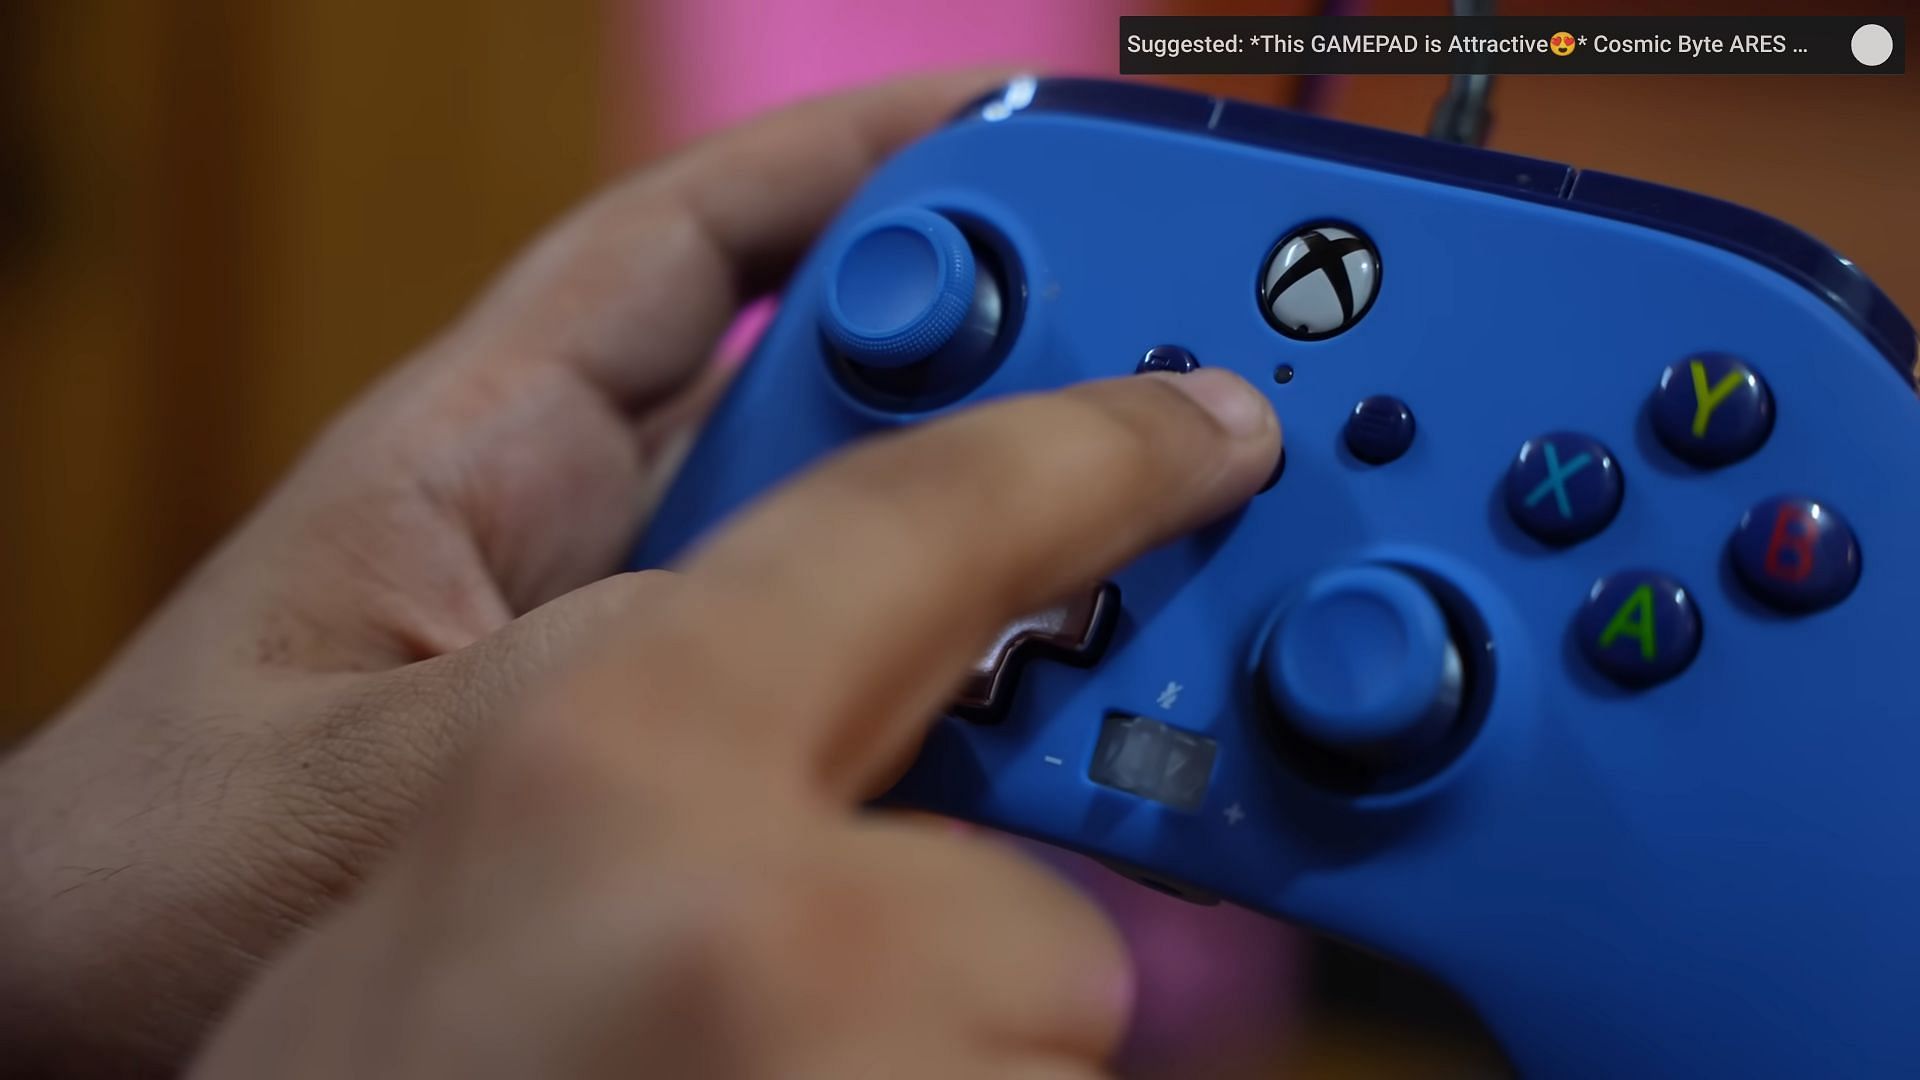 Turning on the controller (Image by Sportskeeda)